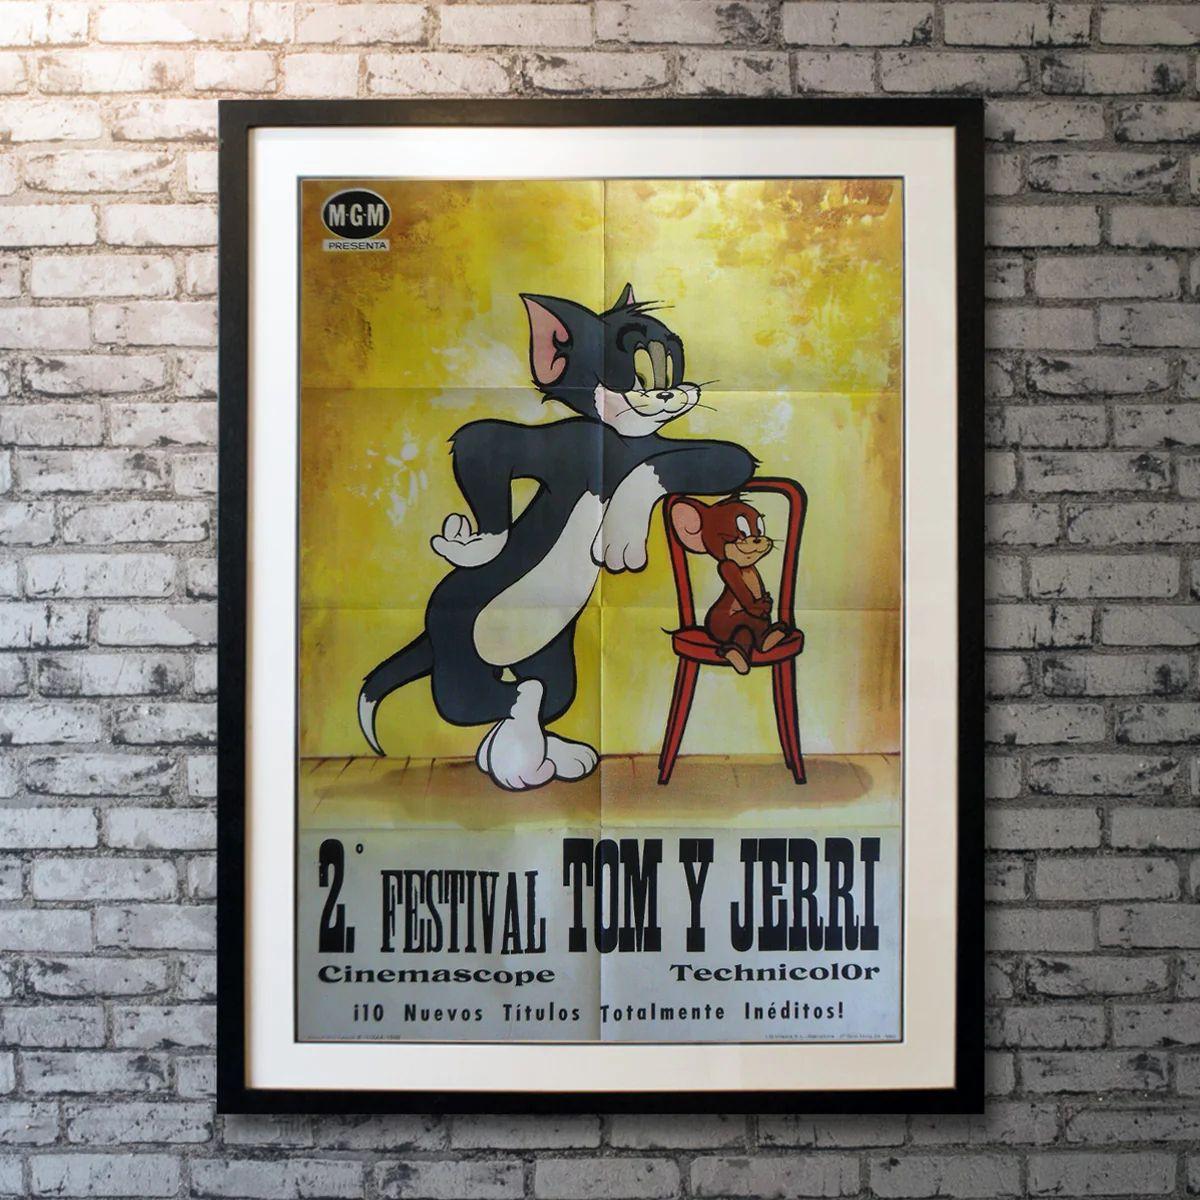 Tom and Jerry, Unframed Poster, 1960

Original One Sheet (27 X 41 Inches). Vintage stock Spanish one-sheet for Tom and Jerry.

Additional Information:
Year: 1960
Nationality: Spain
Condition: Folded
Type: Original One Sheet
Size: 27 X 39